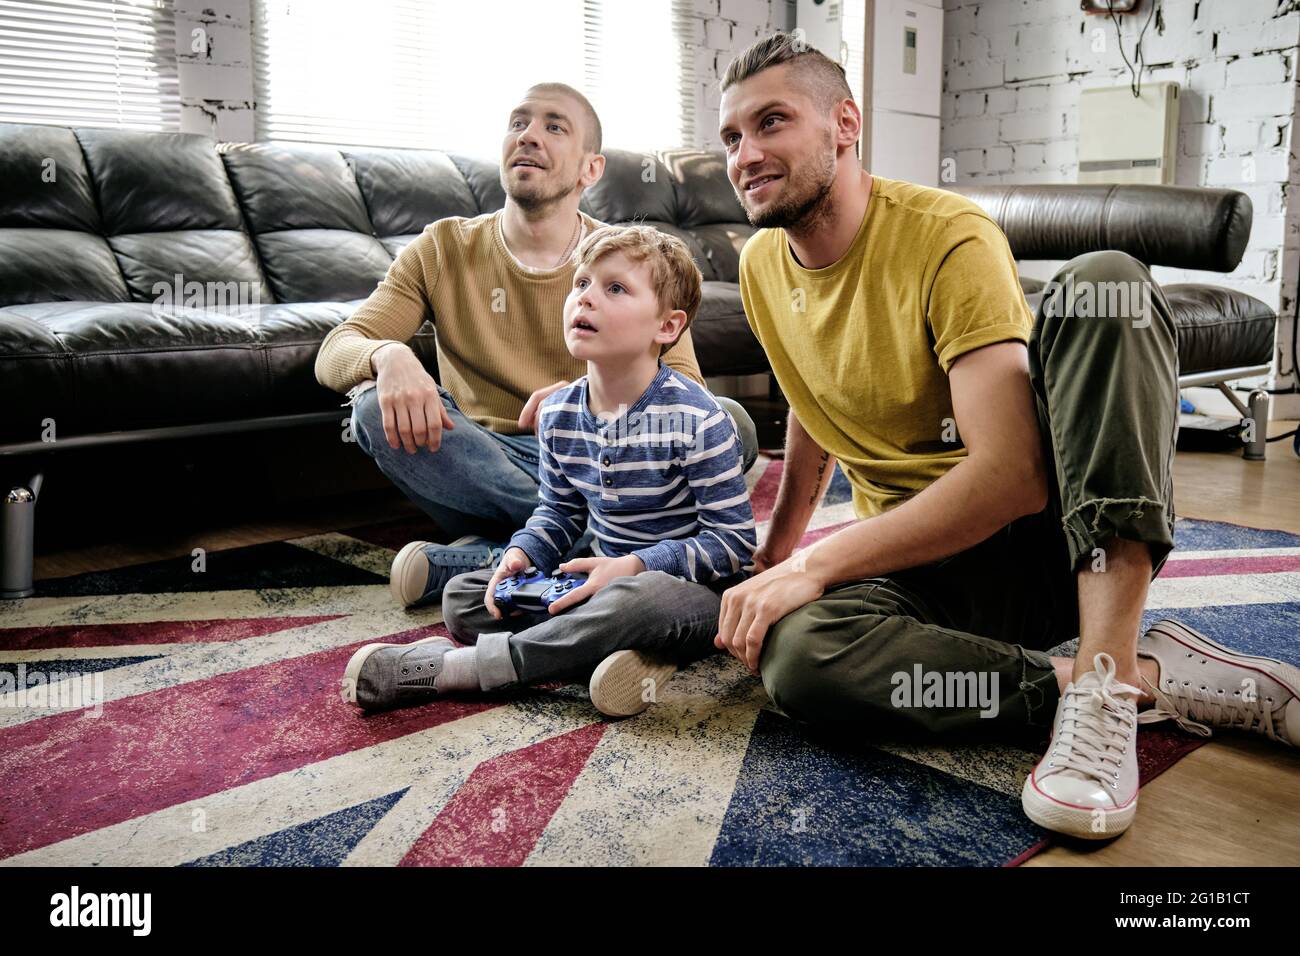 Cute boy and two guys watching television while sitting on the floor Stock Photo